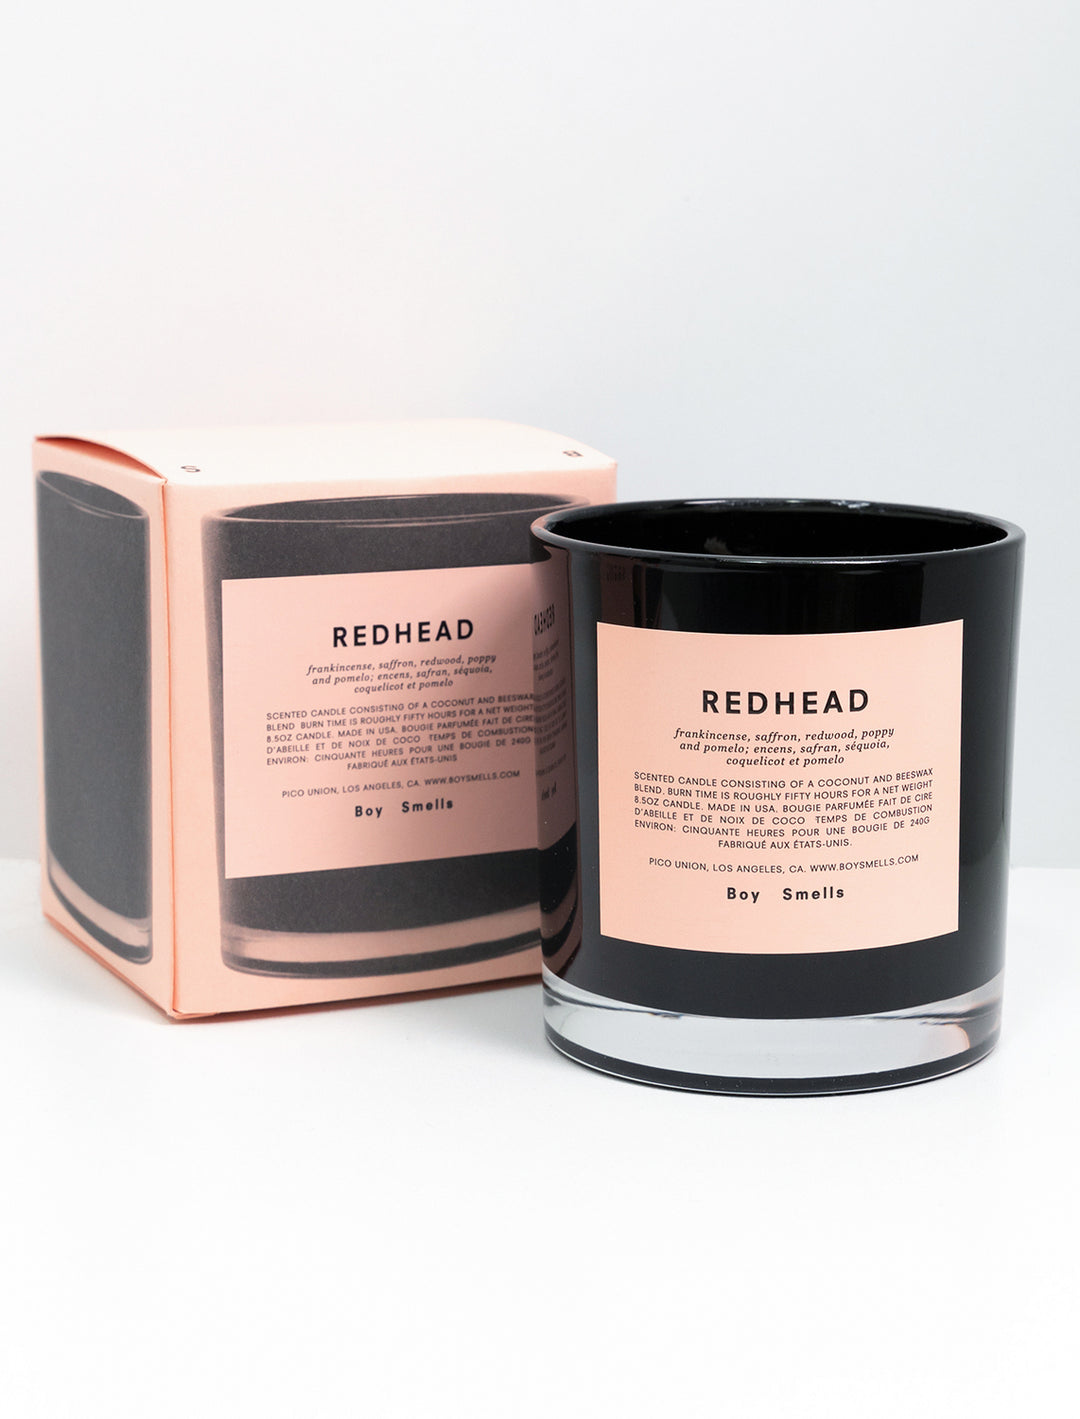 Product packaging of Boy Smells' Redhead candle.